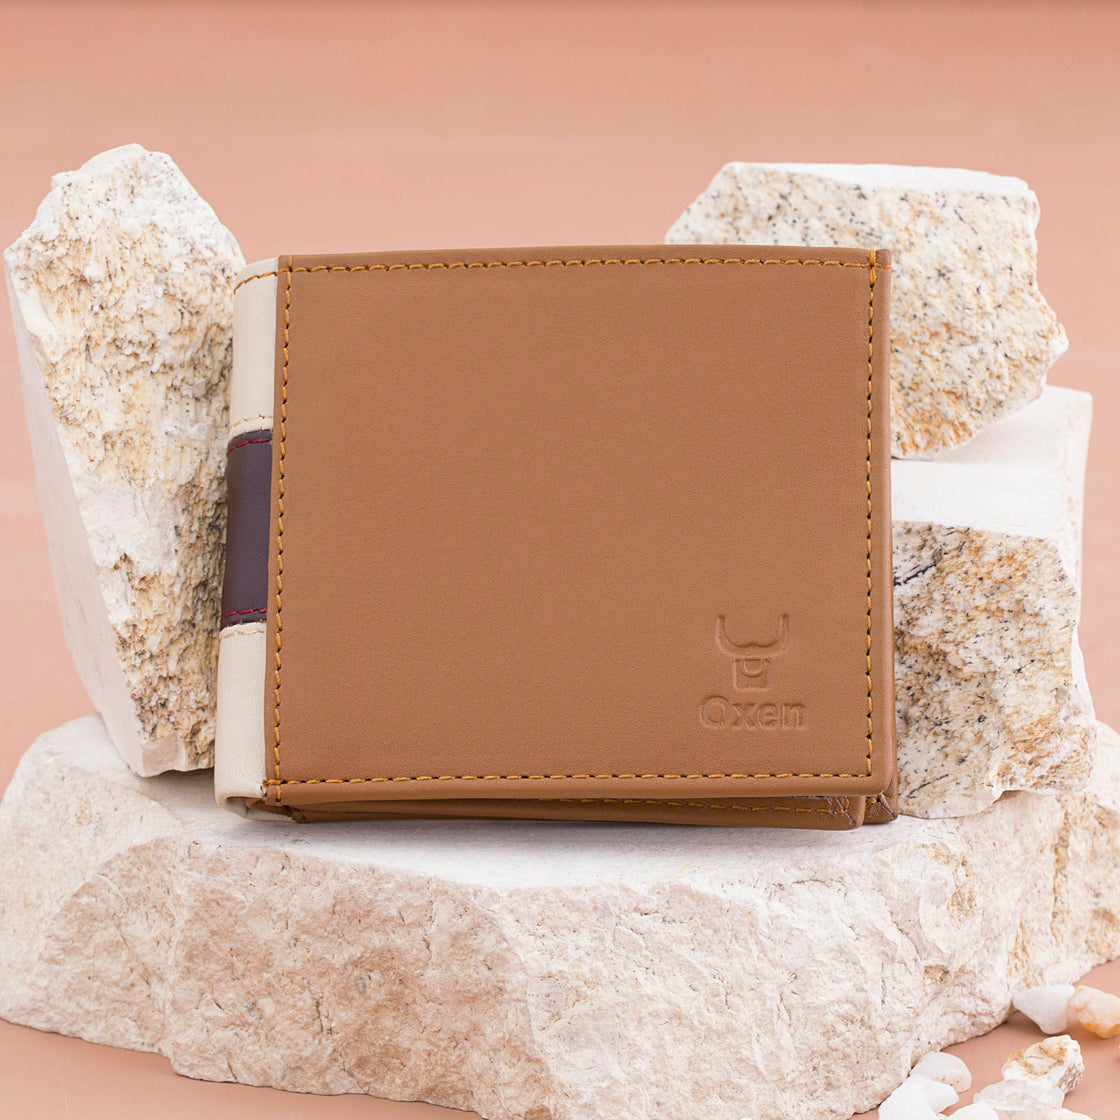 Swiftly Brown Leather Wallet